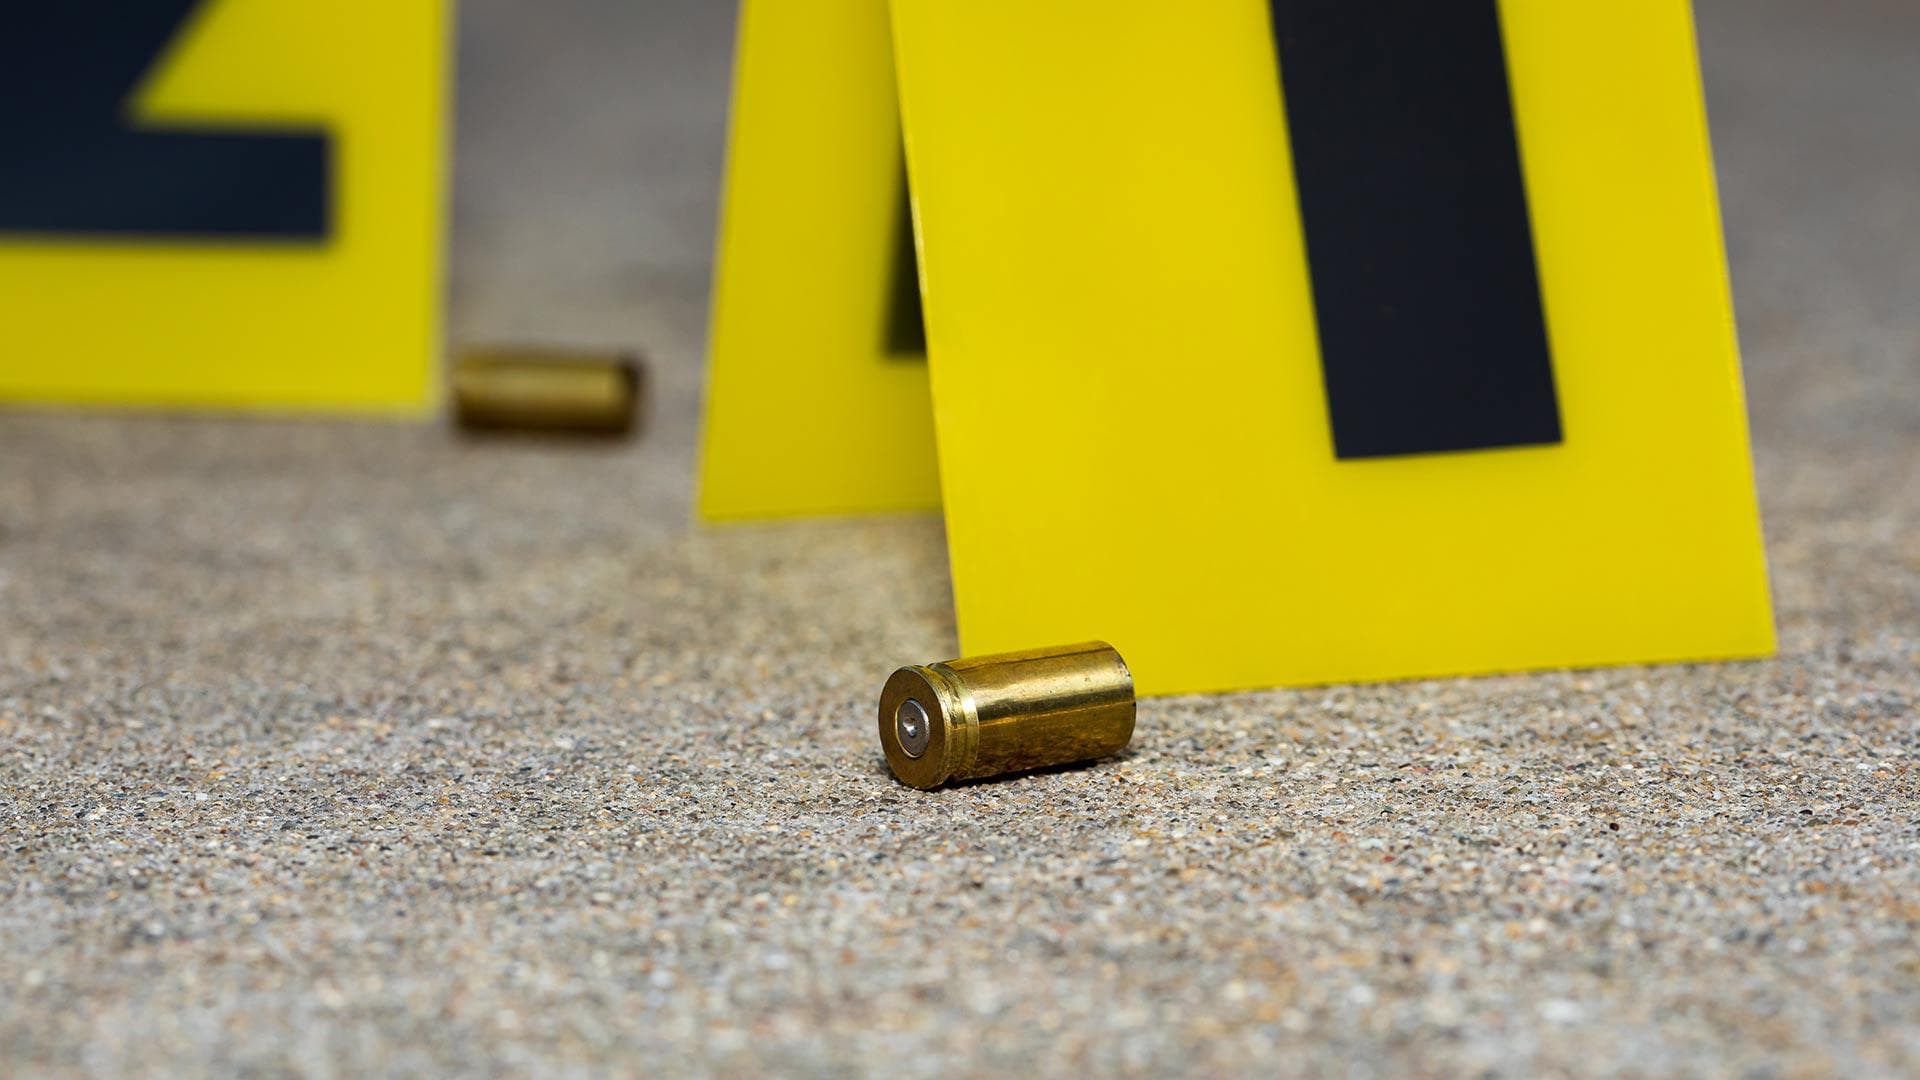 shell casing on ground